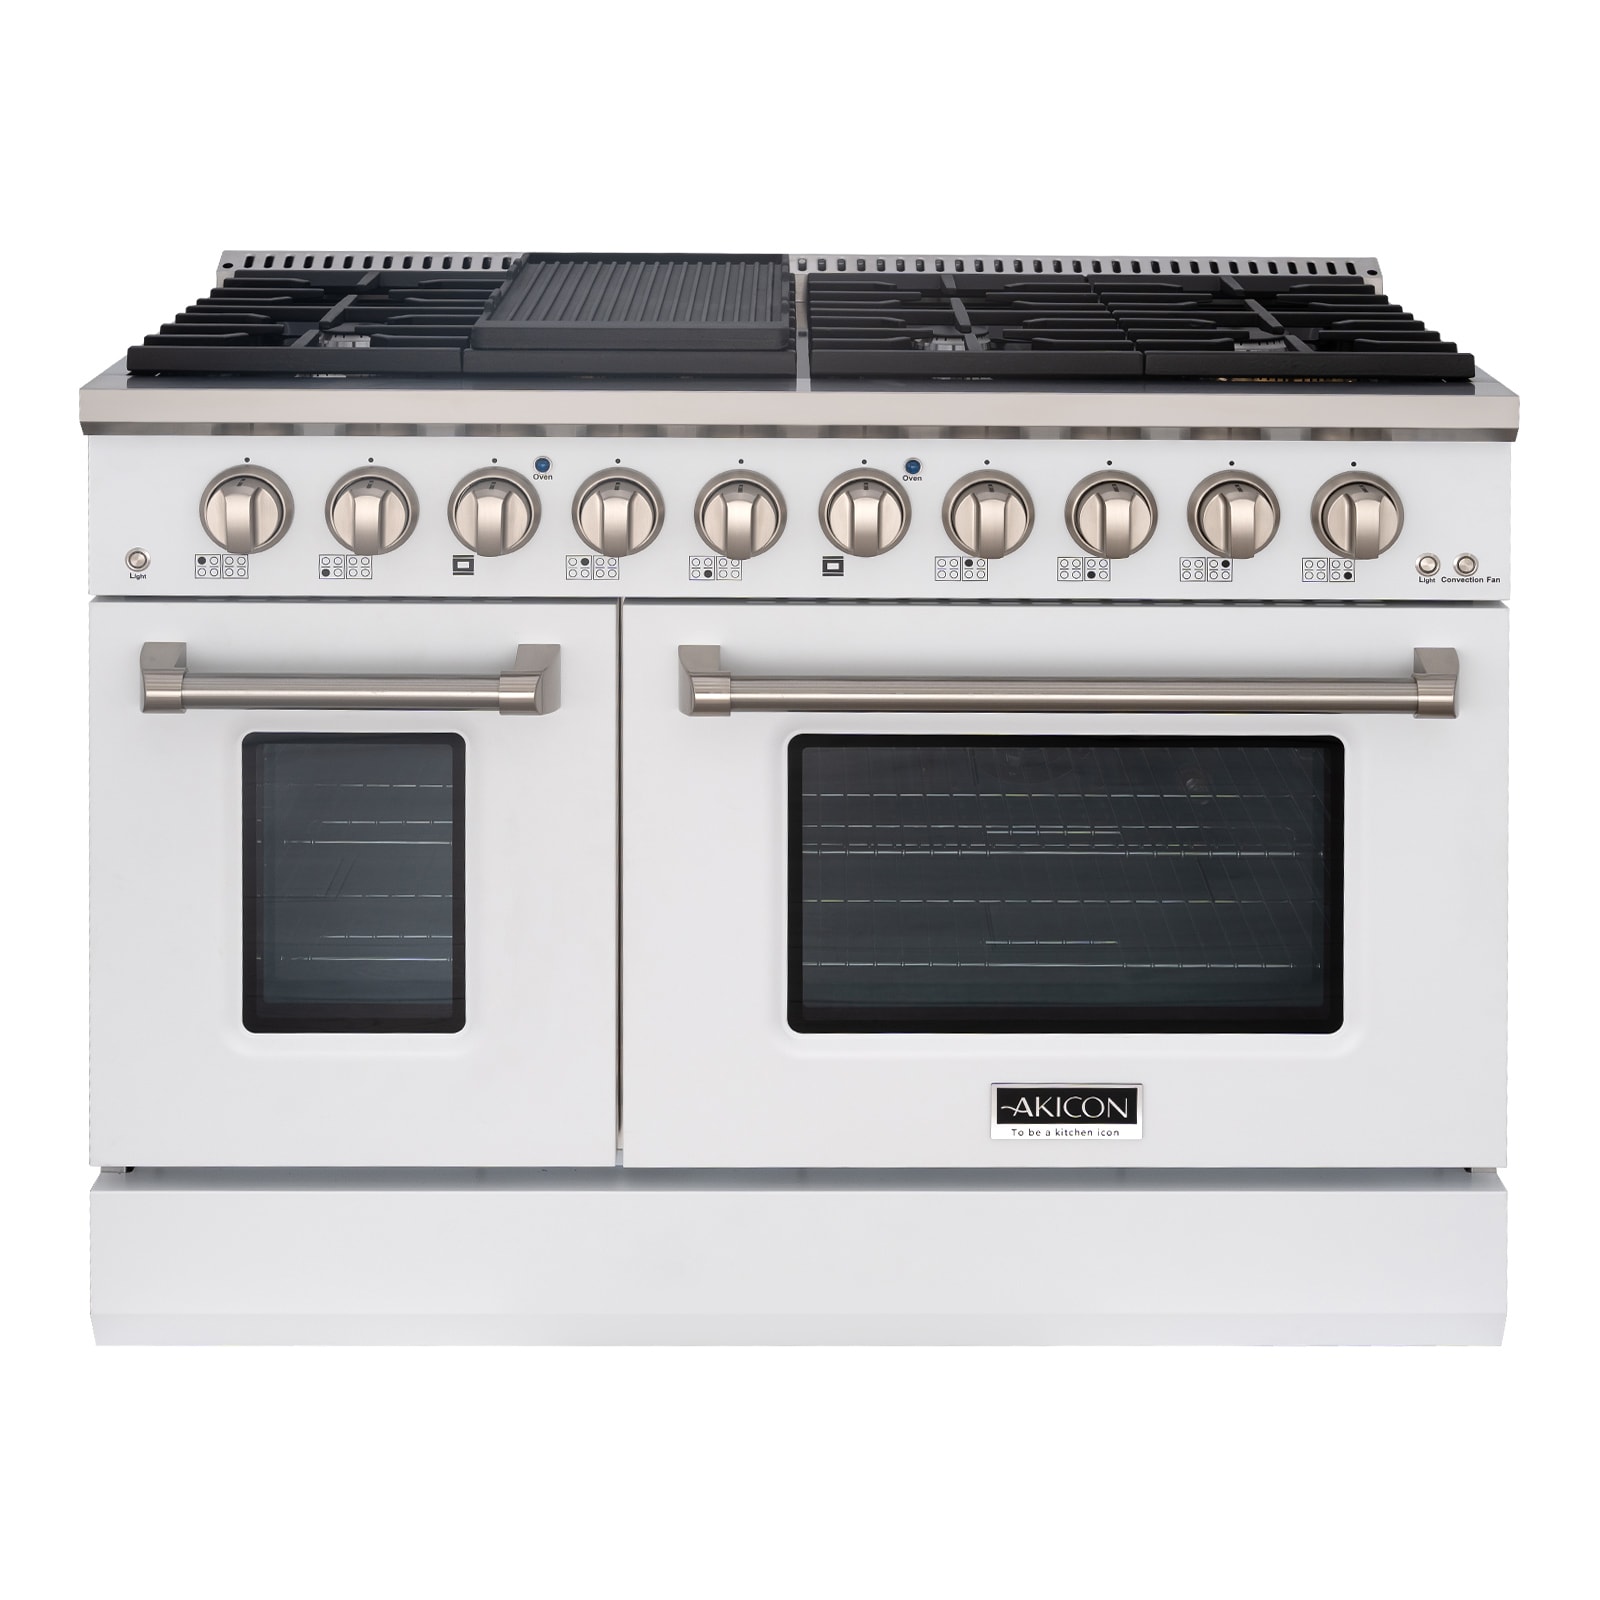 6.7 cu. ft. Double Oven Dual Fuel Gas Range with Self-Cleaning Convection  Oven in Stainless Steel